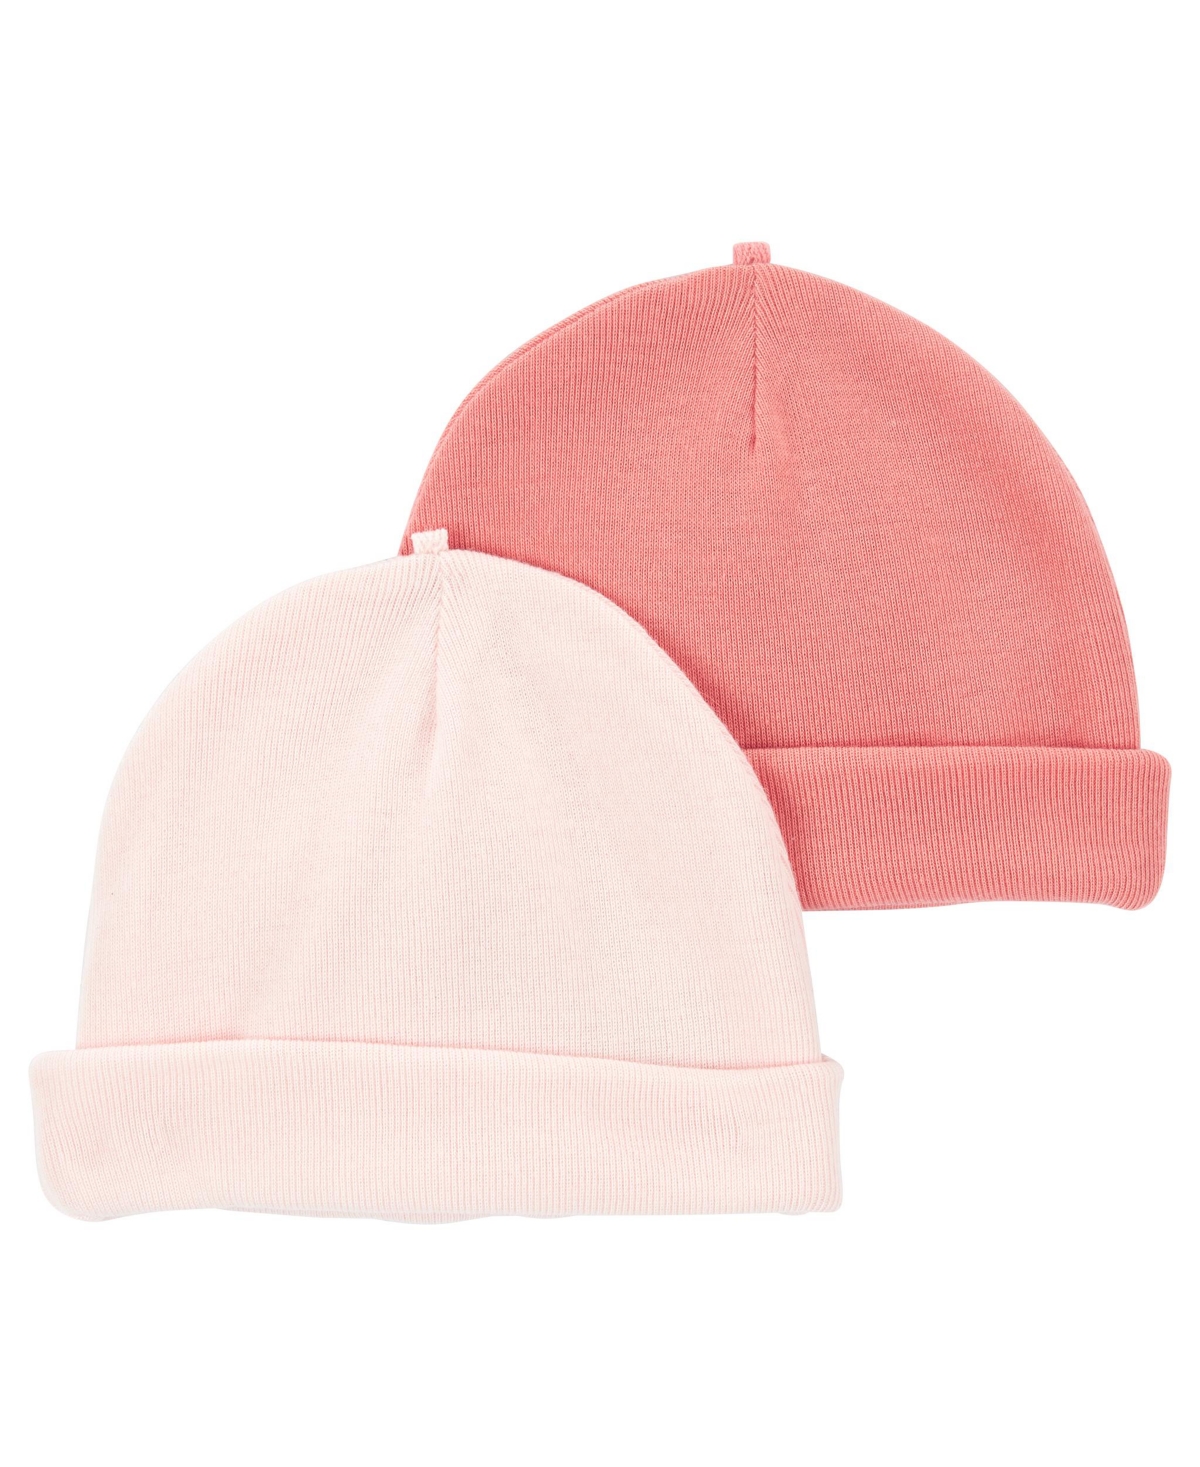 Carter's Baby Girls Rolled Cuff Hats, Pack Of 2 In Pink